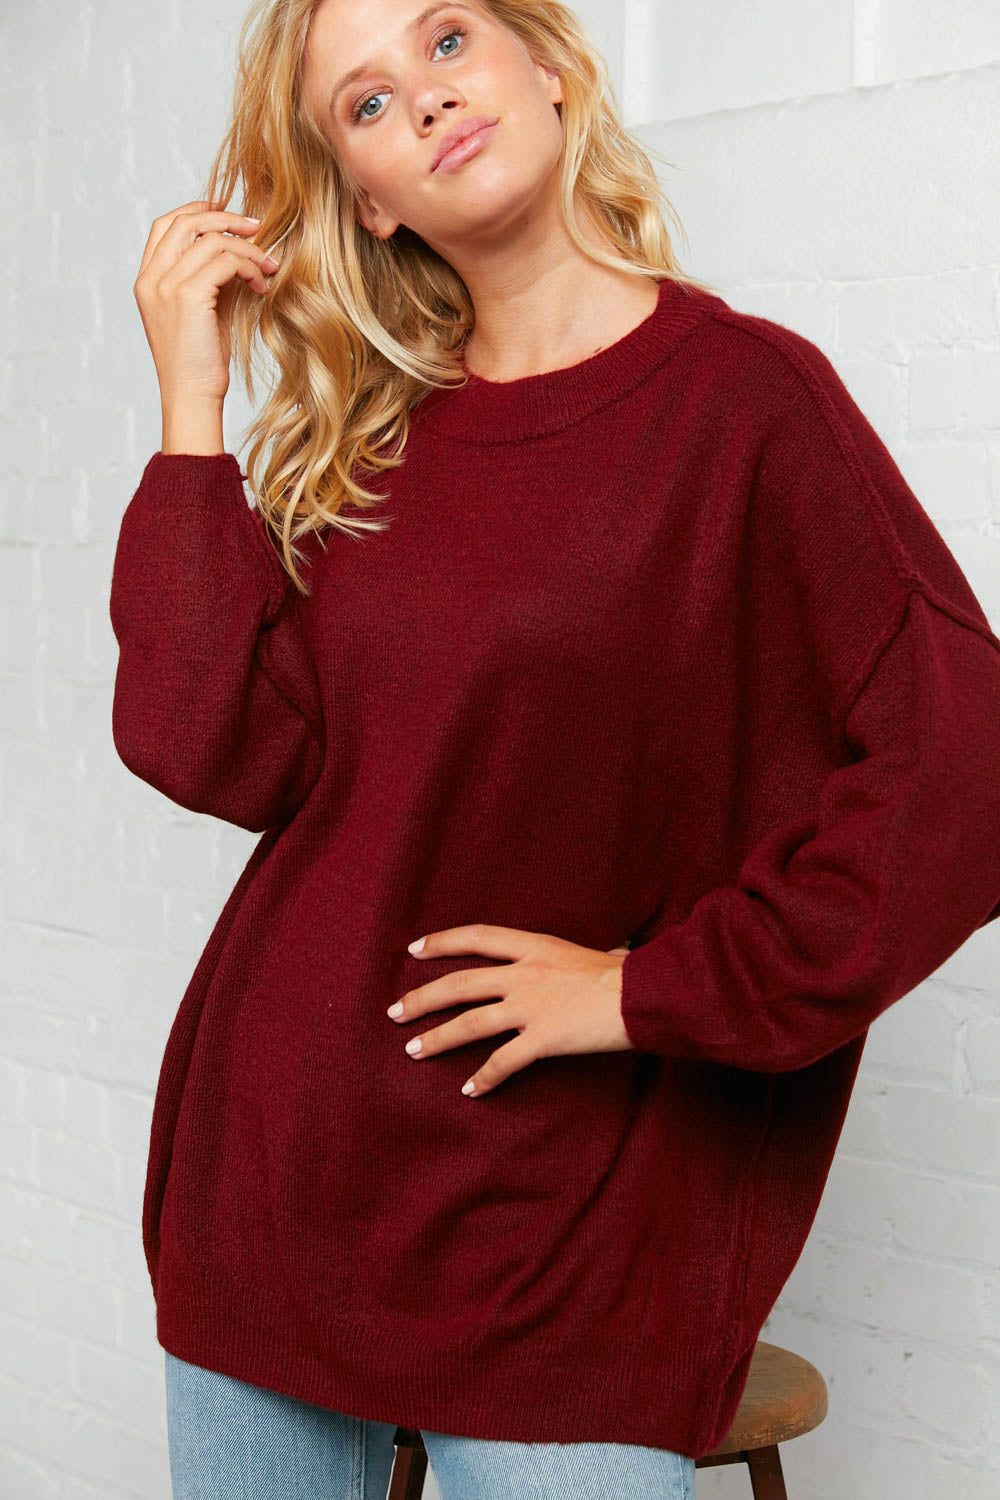 Burgundy Oversized Out Seam Knit Sweater Top - Sybaritic Bags & Clothing